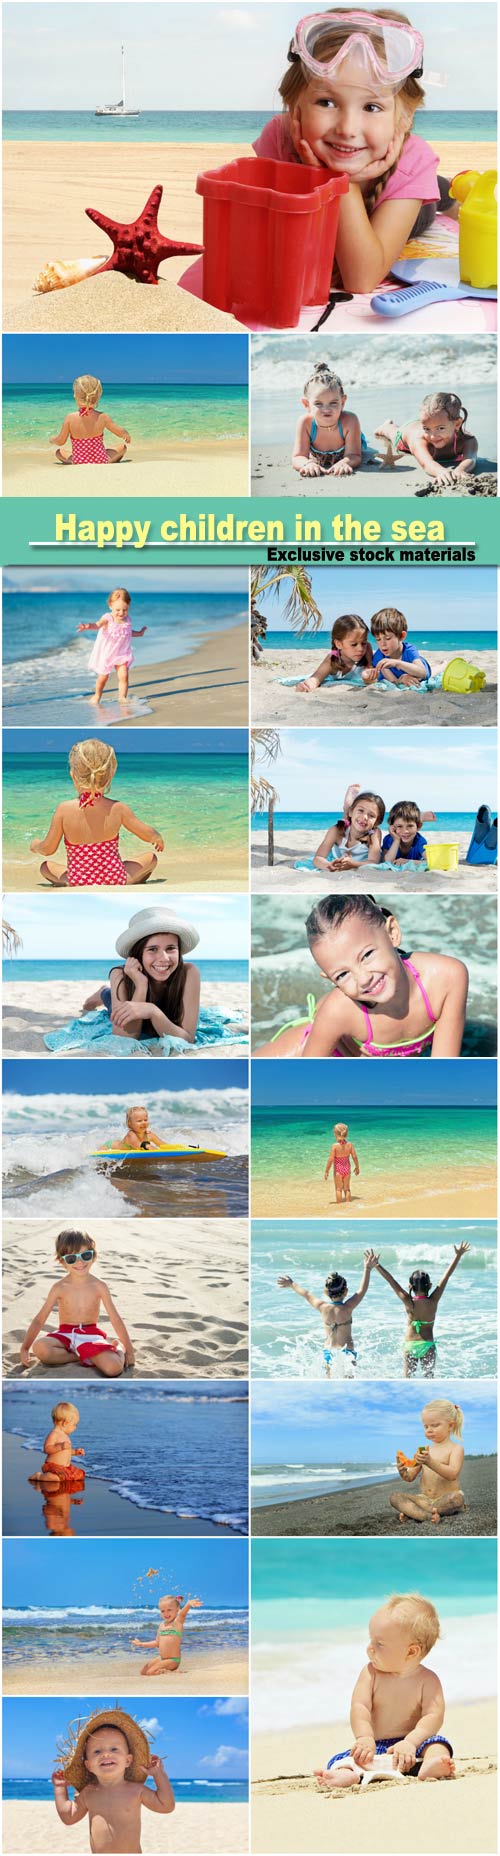 Happy children in the sea, for summer vacation